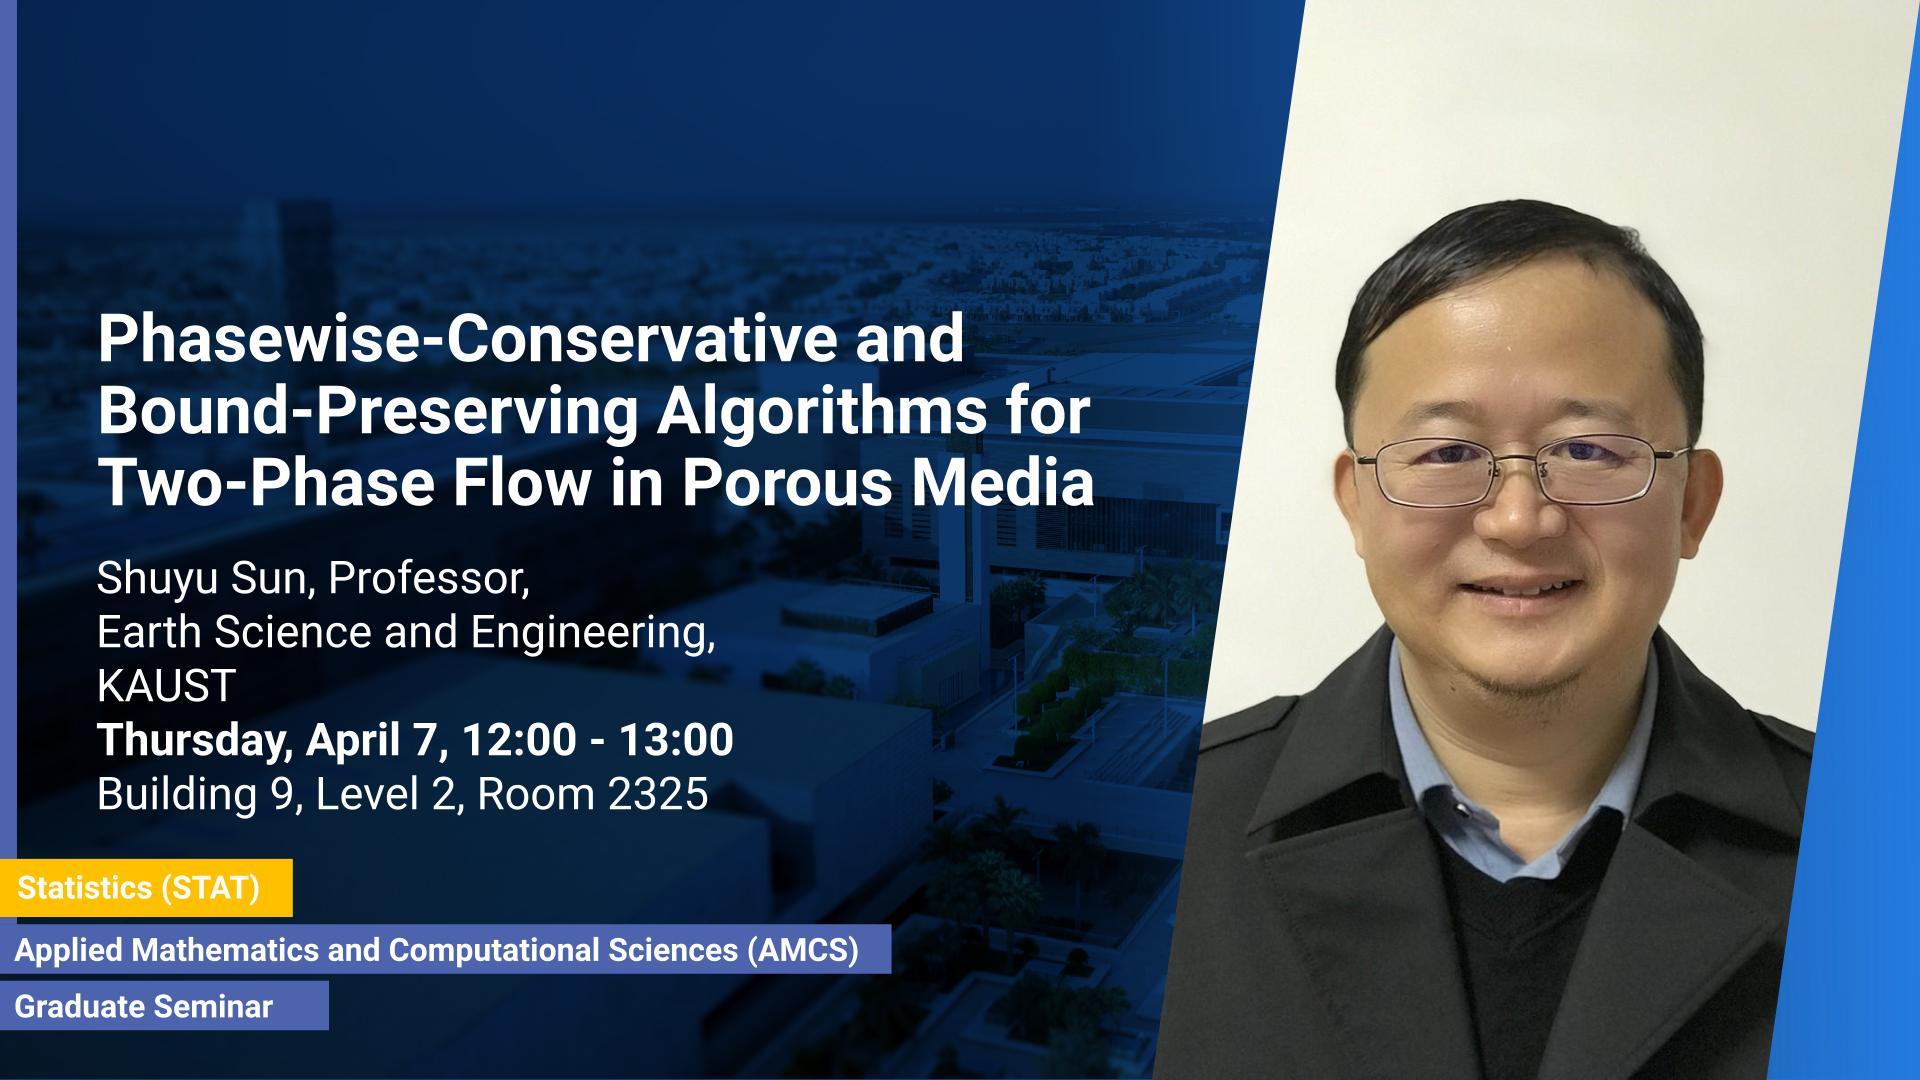 KAUST CEMSE AMCS STAT Graduate Seminar Shuyu Sun Phasewise Conservative and Bound Preserving Algorithms for Two-Phase Flow in Porous Media